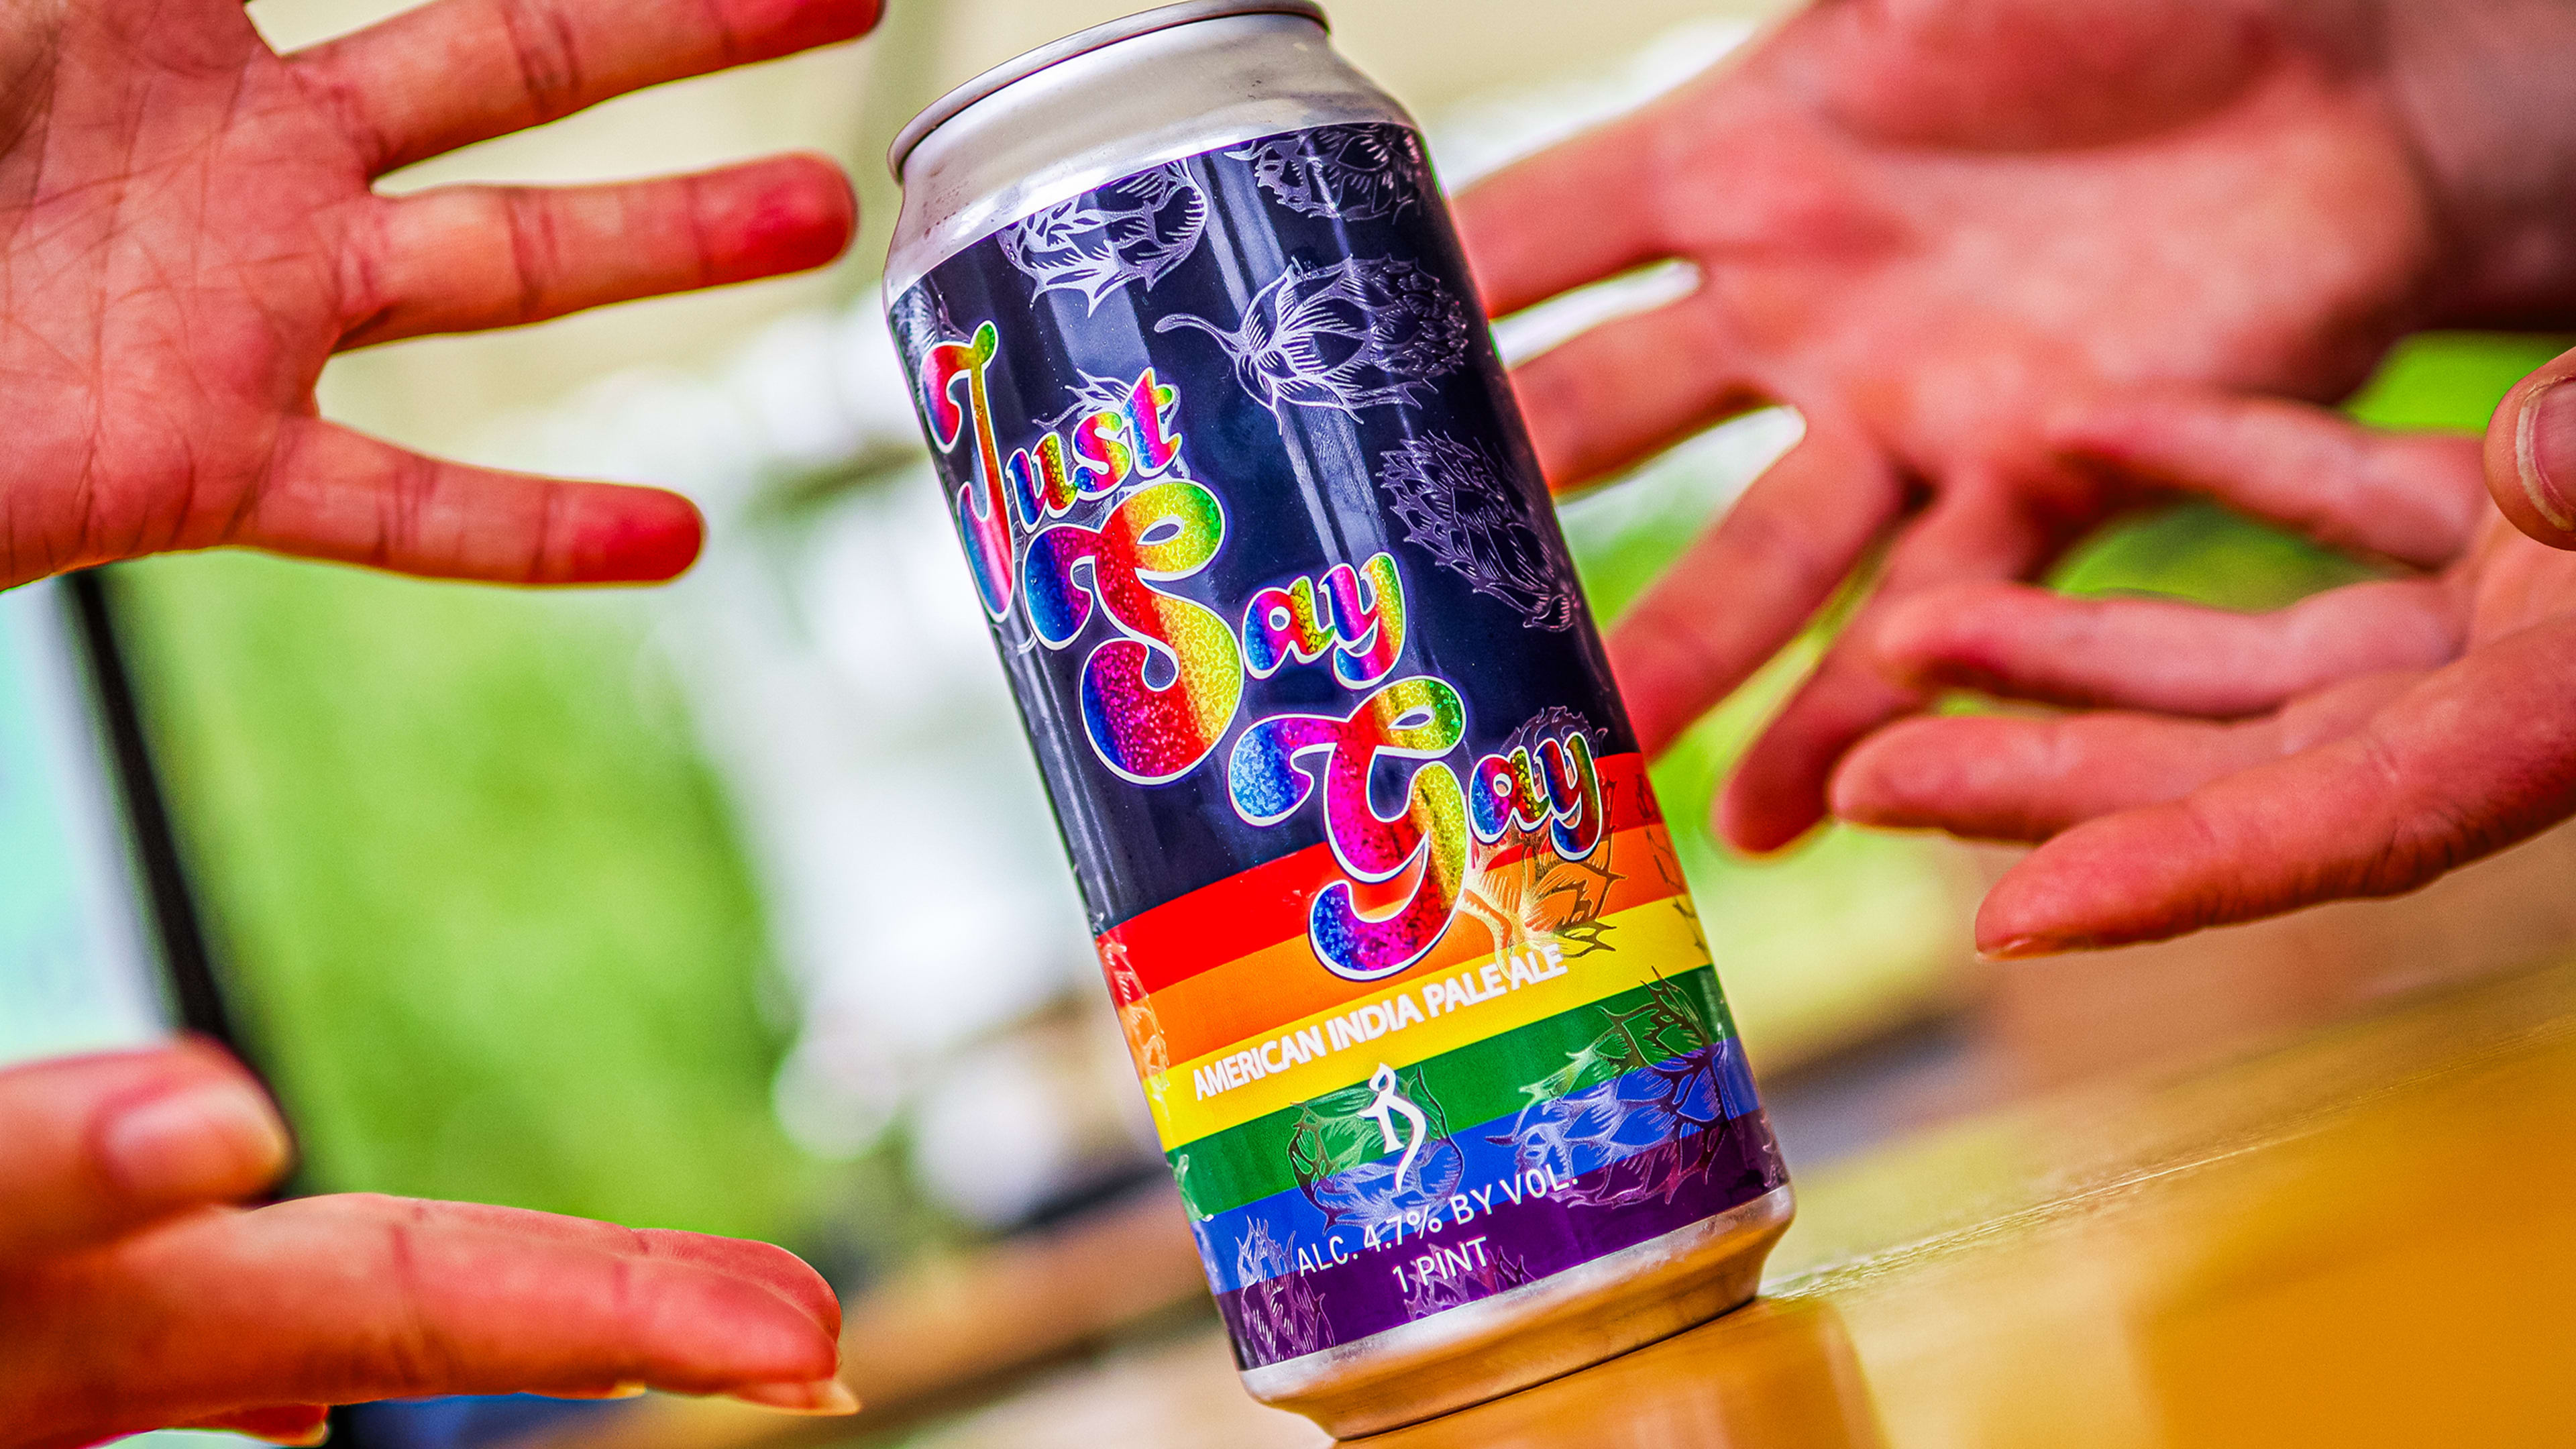 Why Alchemist, brewer of the popular IPA Heady Topper, decided to launch a beer called Just Say Gay